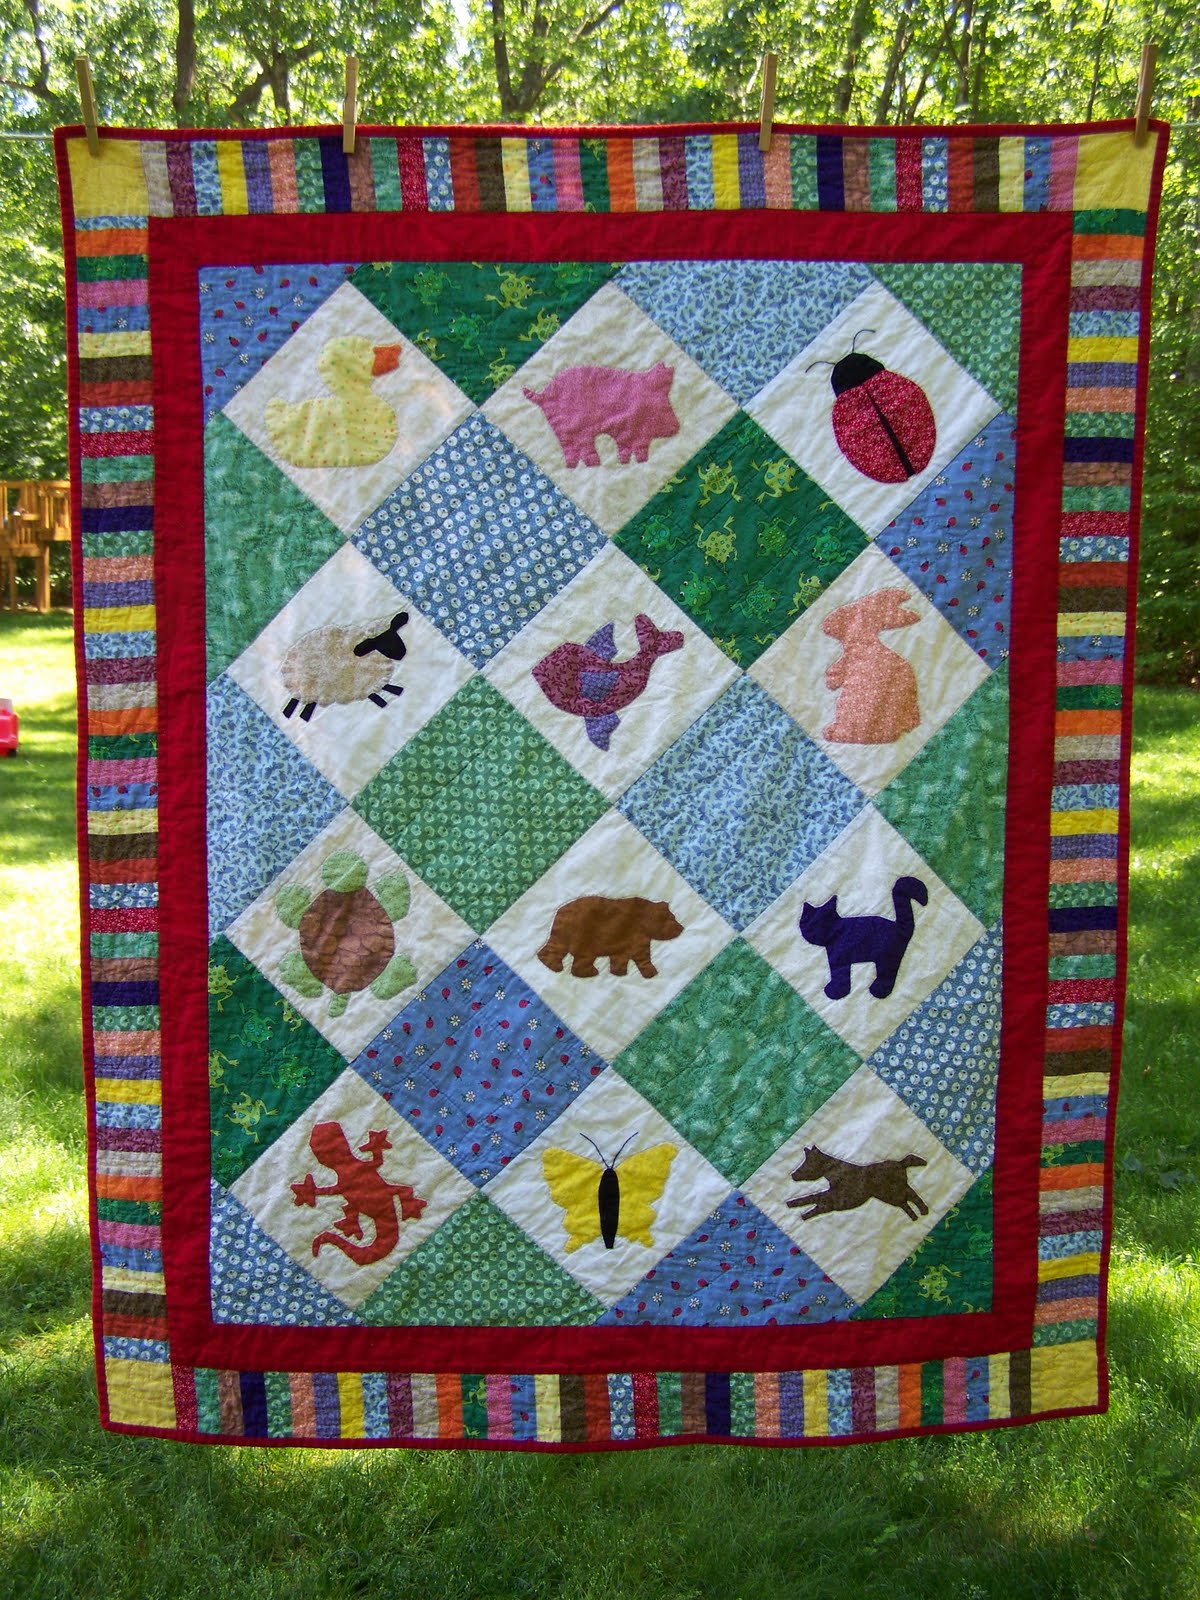 When Life Gives You Scraps, Make Quilts!